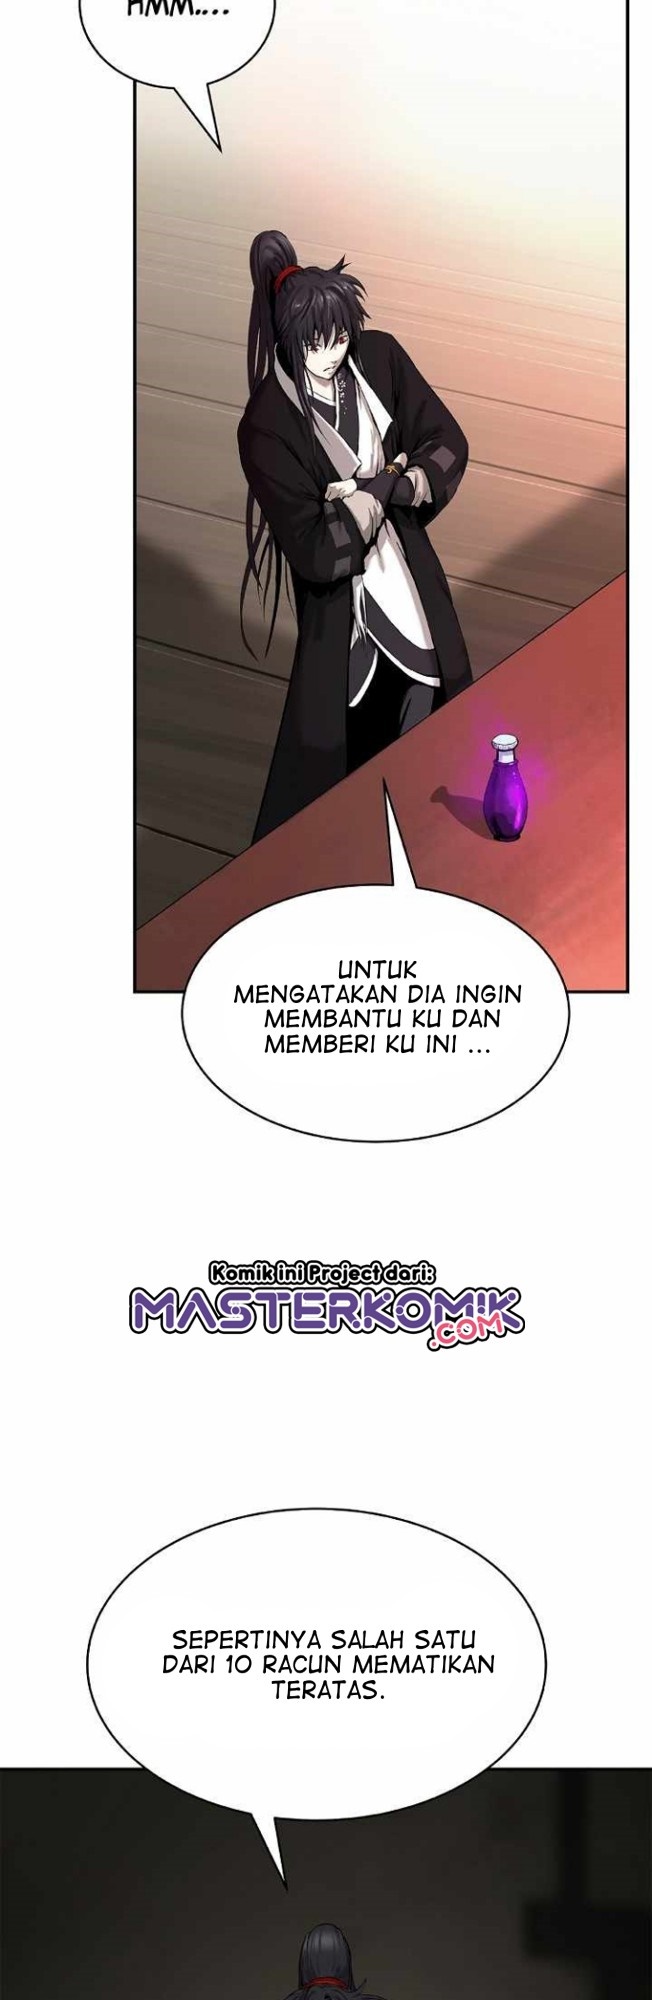 Cystic Story (Call The Spear) Chapter 52